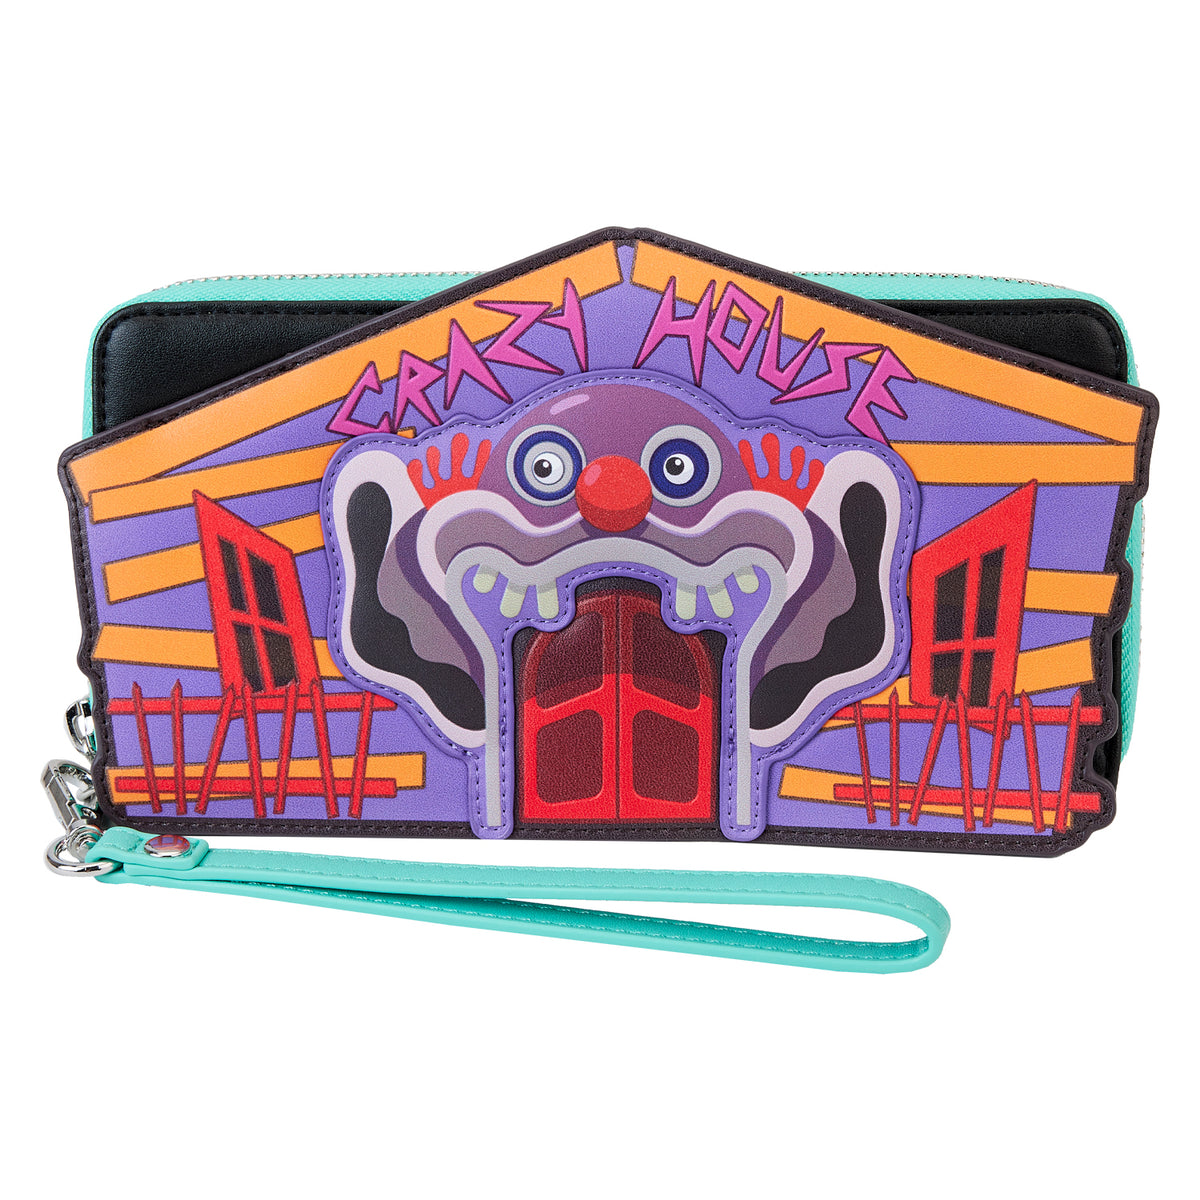 Killer Klowns from Outer Space Loungefly Zip-Around Glowing Wristlet Wallet